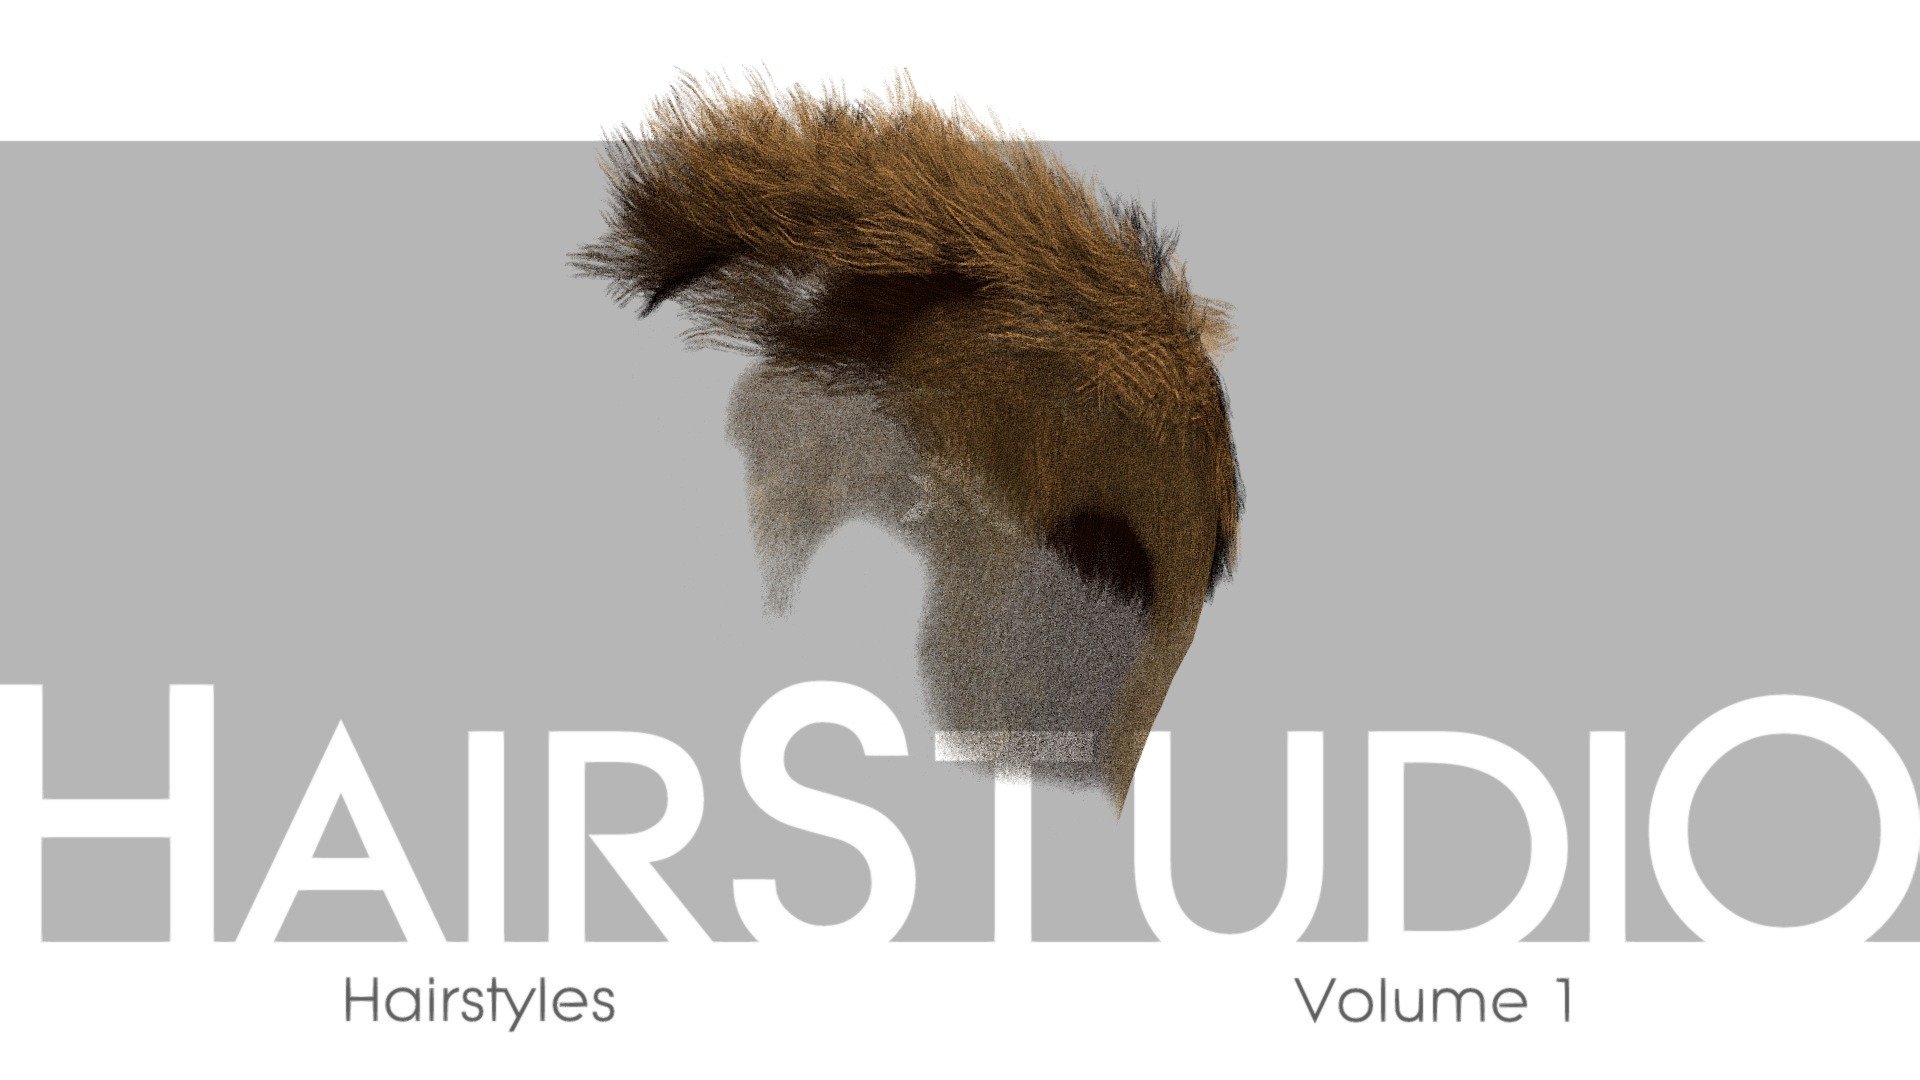 Full/Messy/Classic HairStyle from HairStudio Vol.01. 

Please see &ldquo;annotations